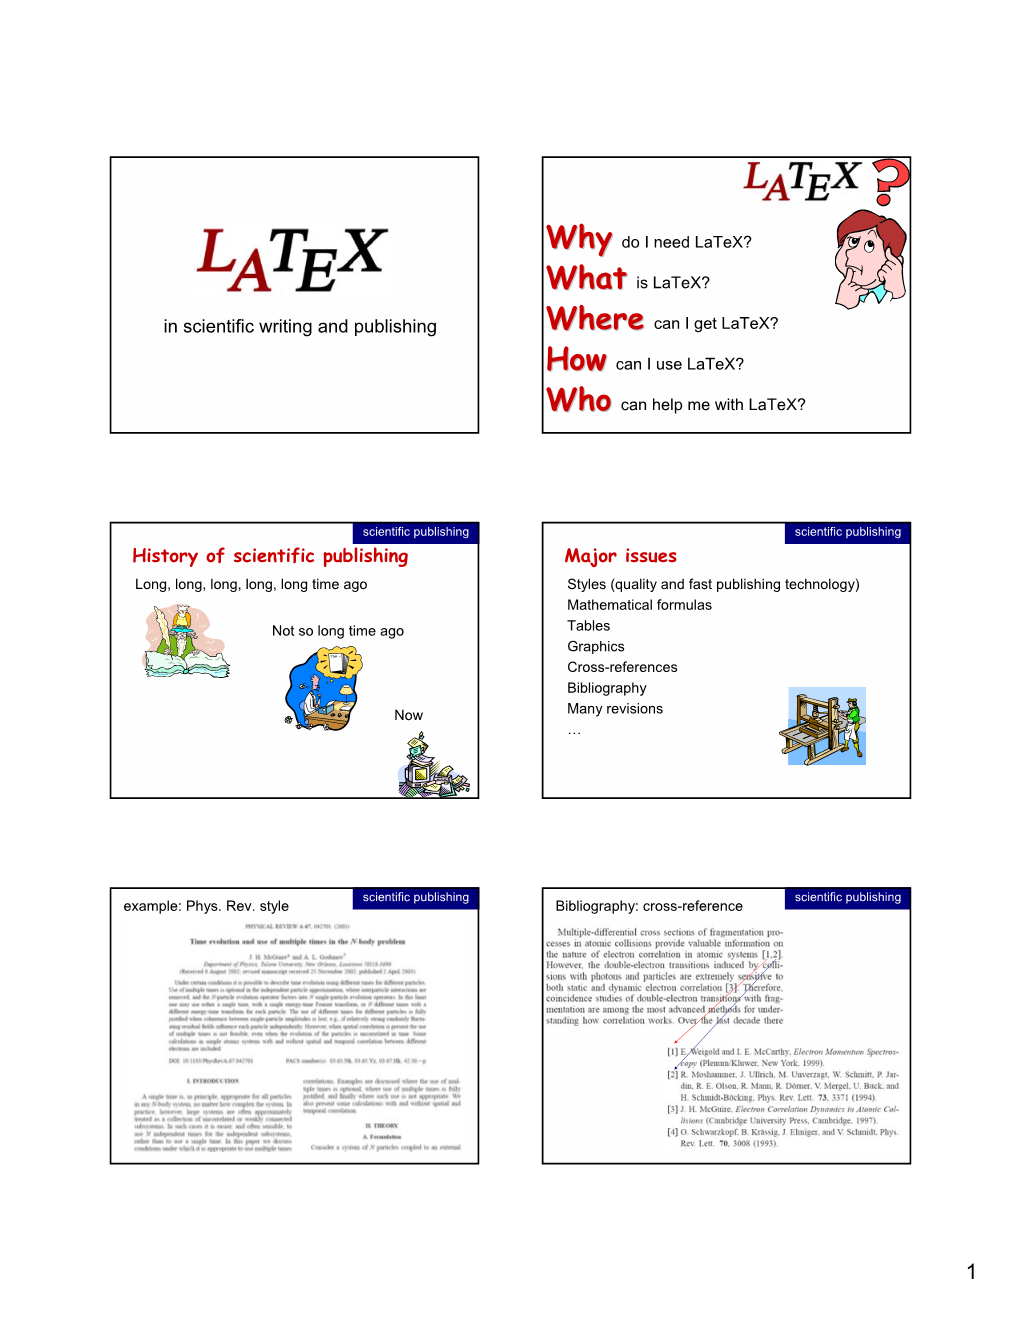 Latex in Scientific Writing and Publishing